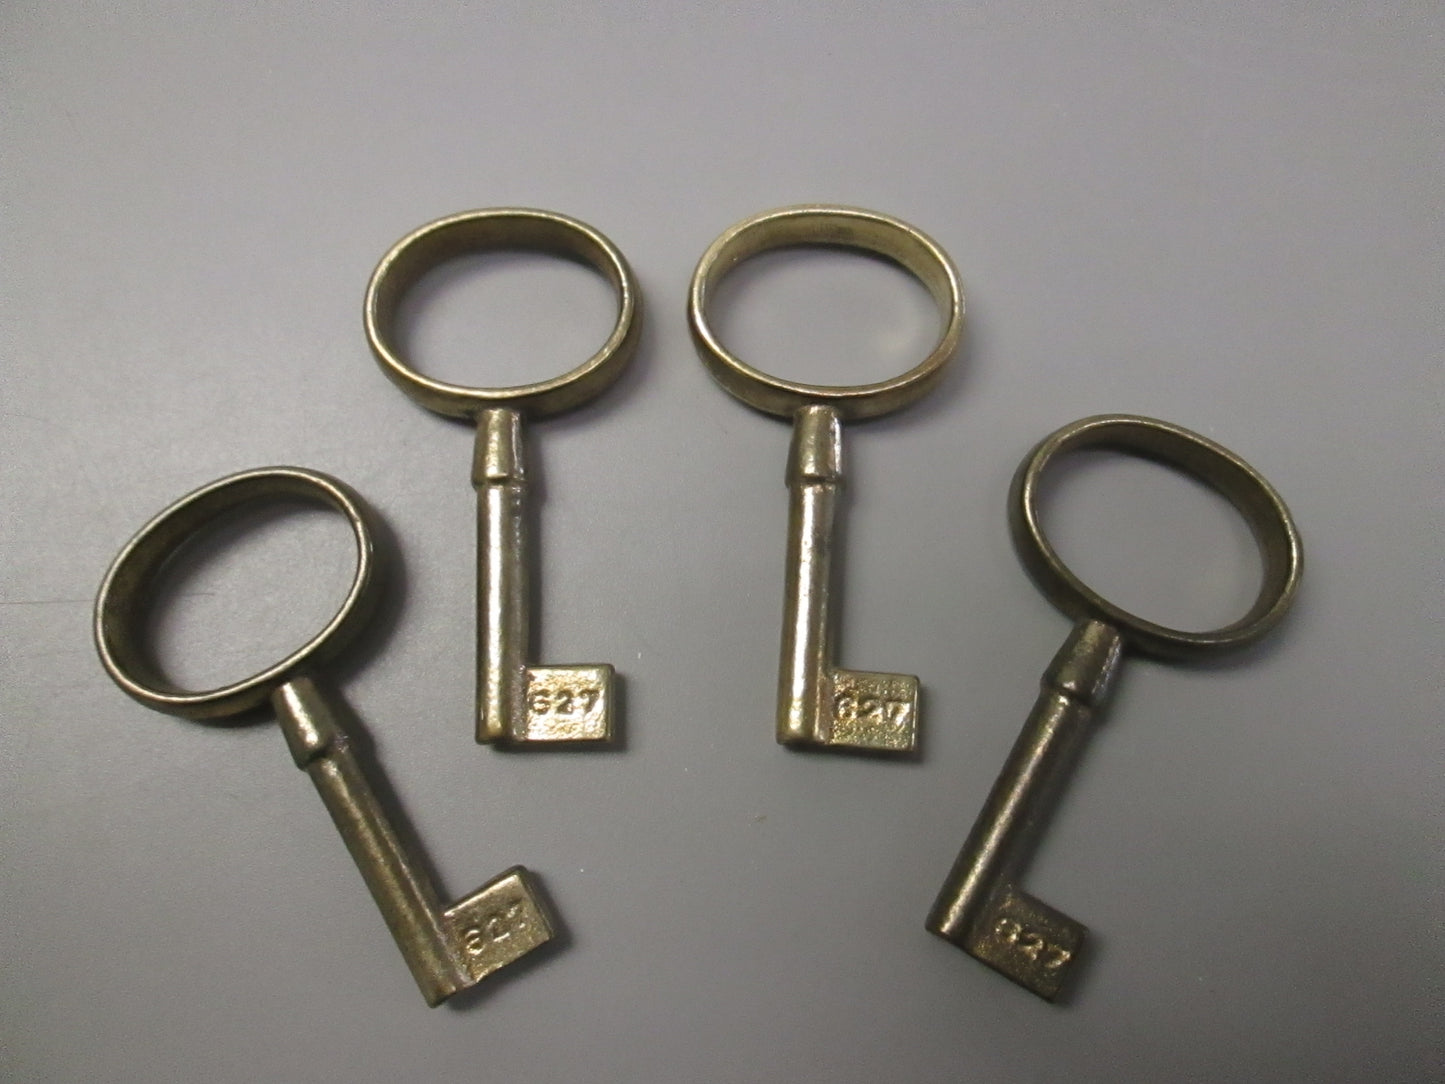 Taylor 627 Drilled Furniture Key Lot of 4